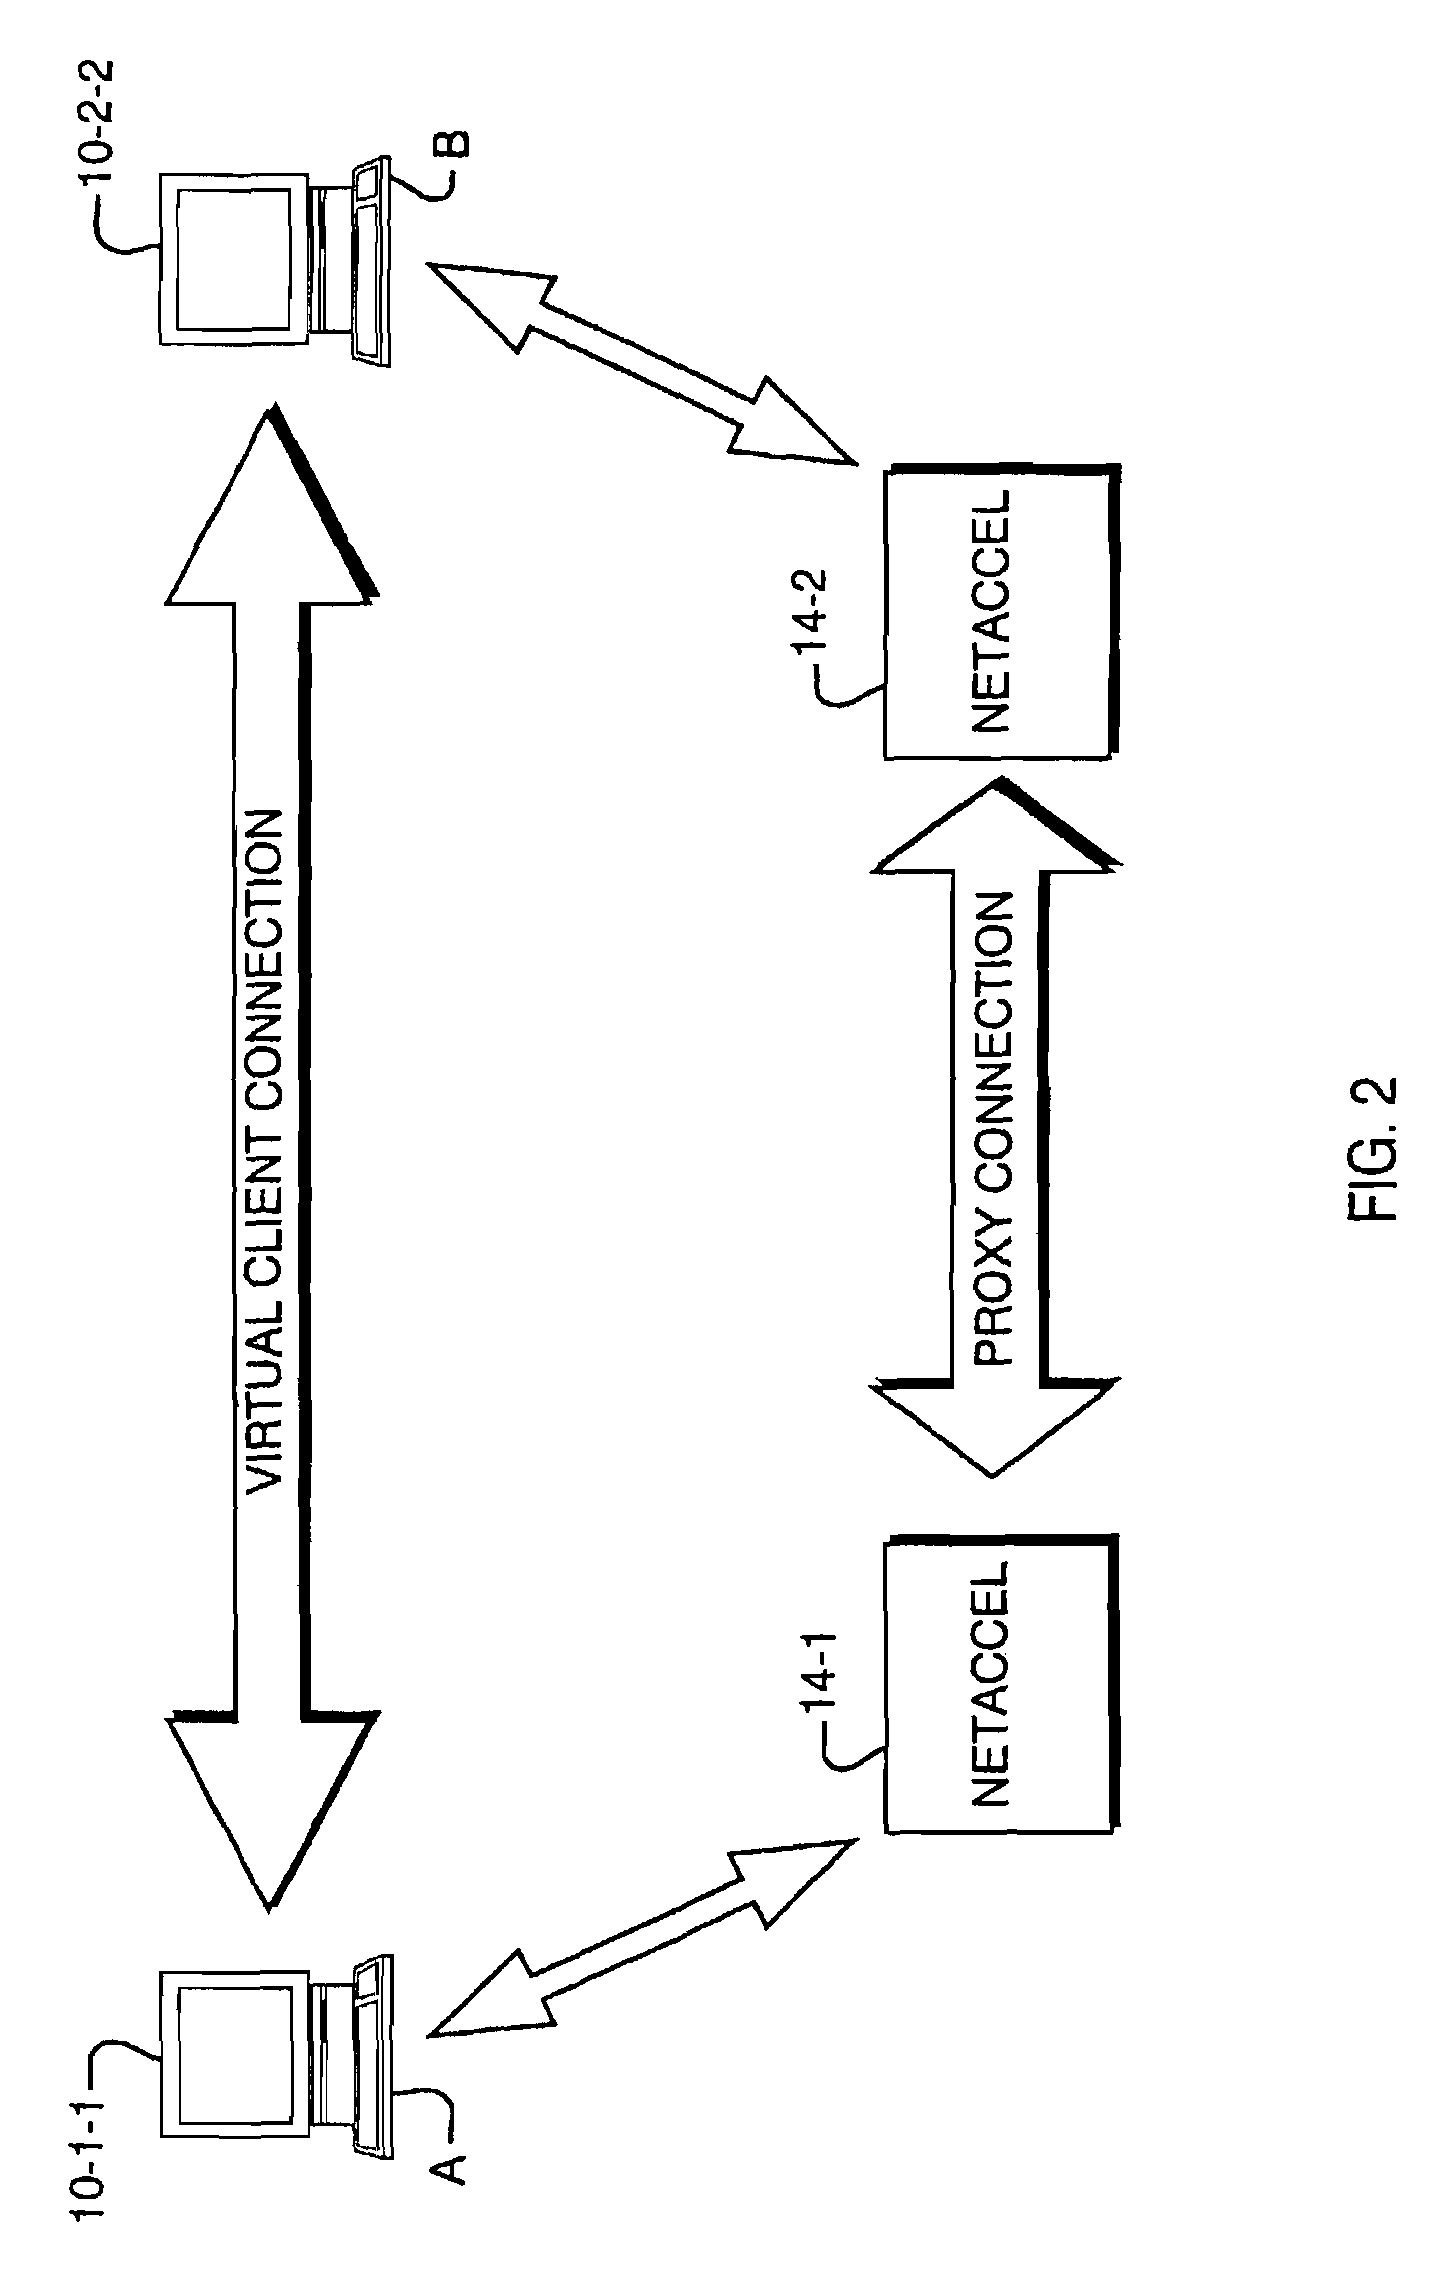 Architecture for efficient utilization and optimum performance of a network